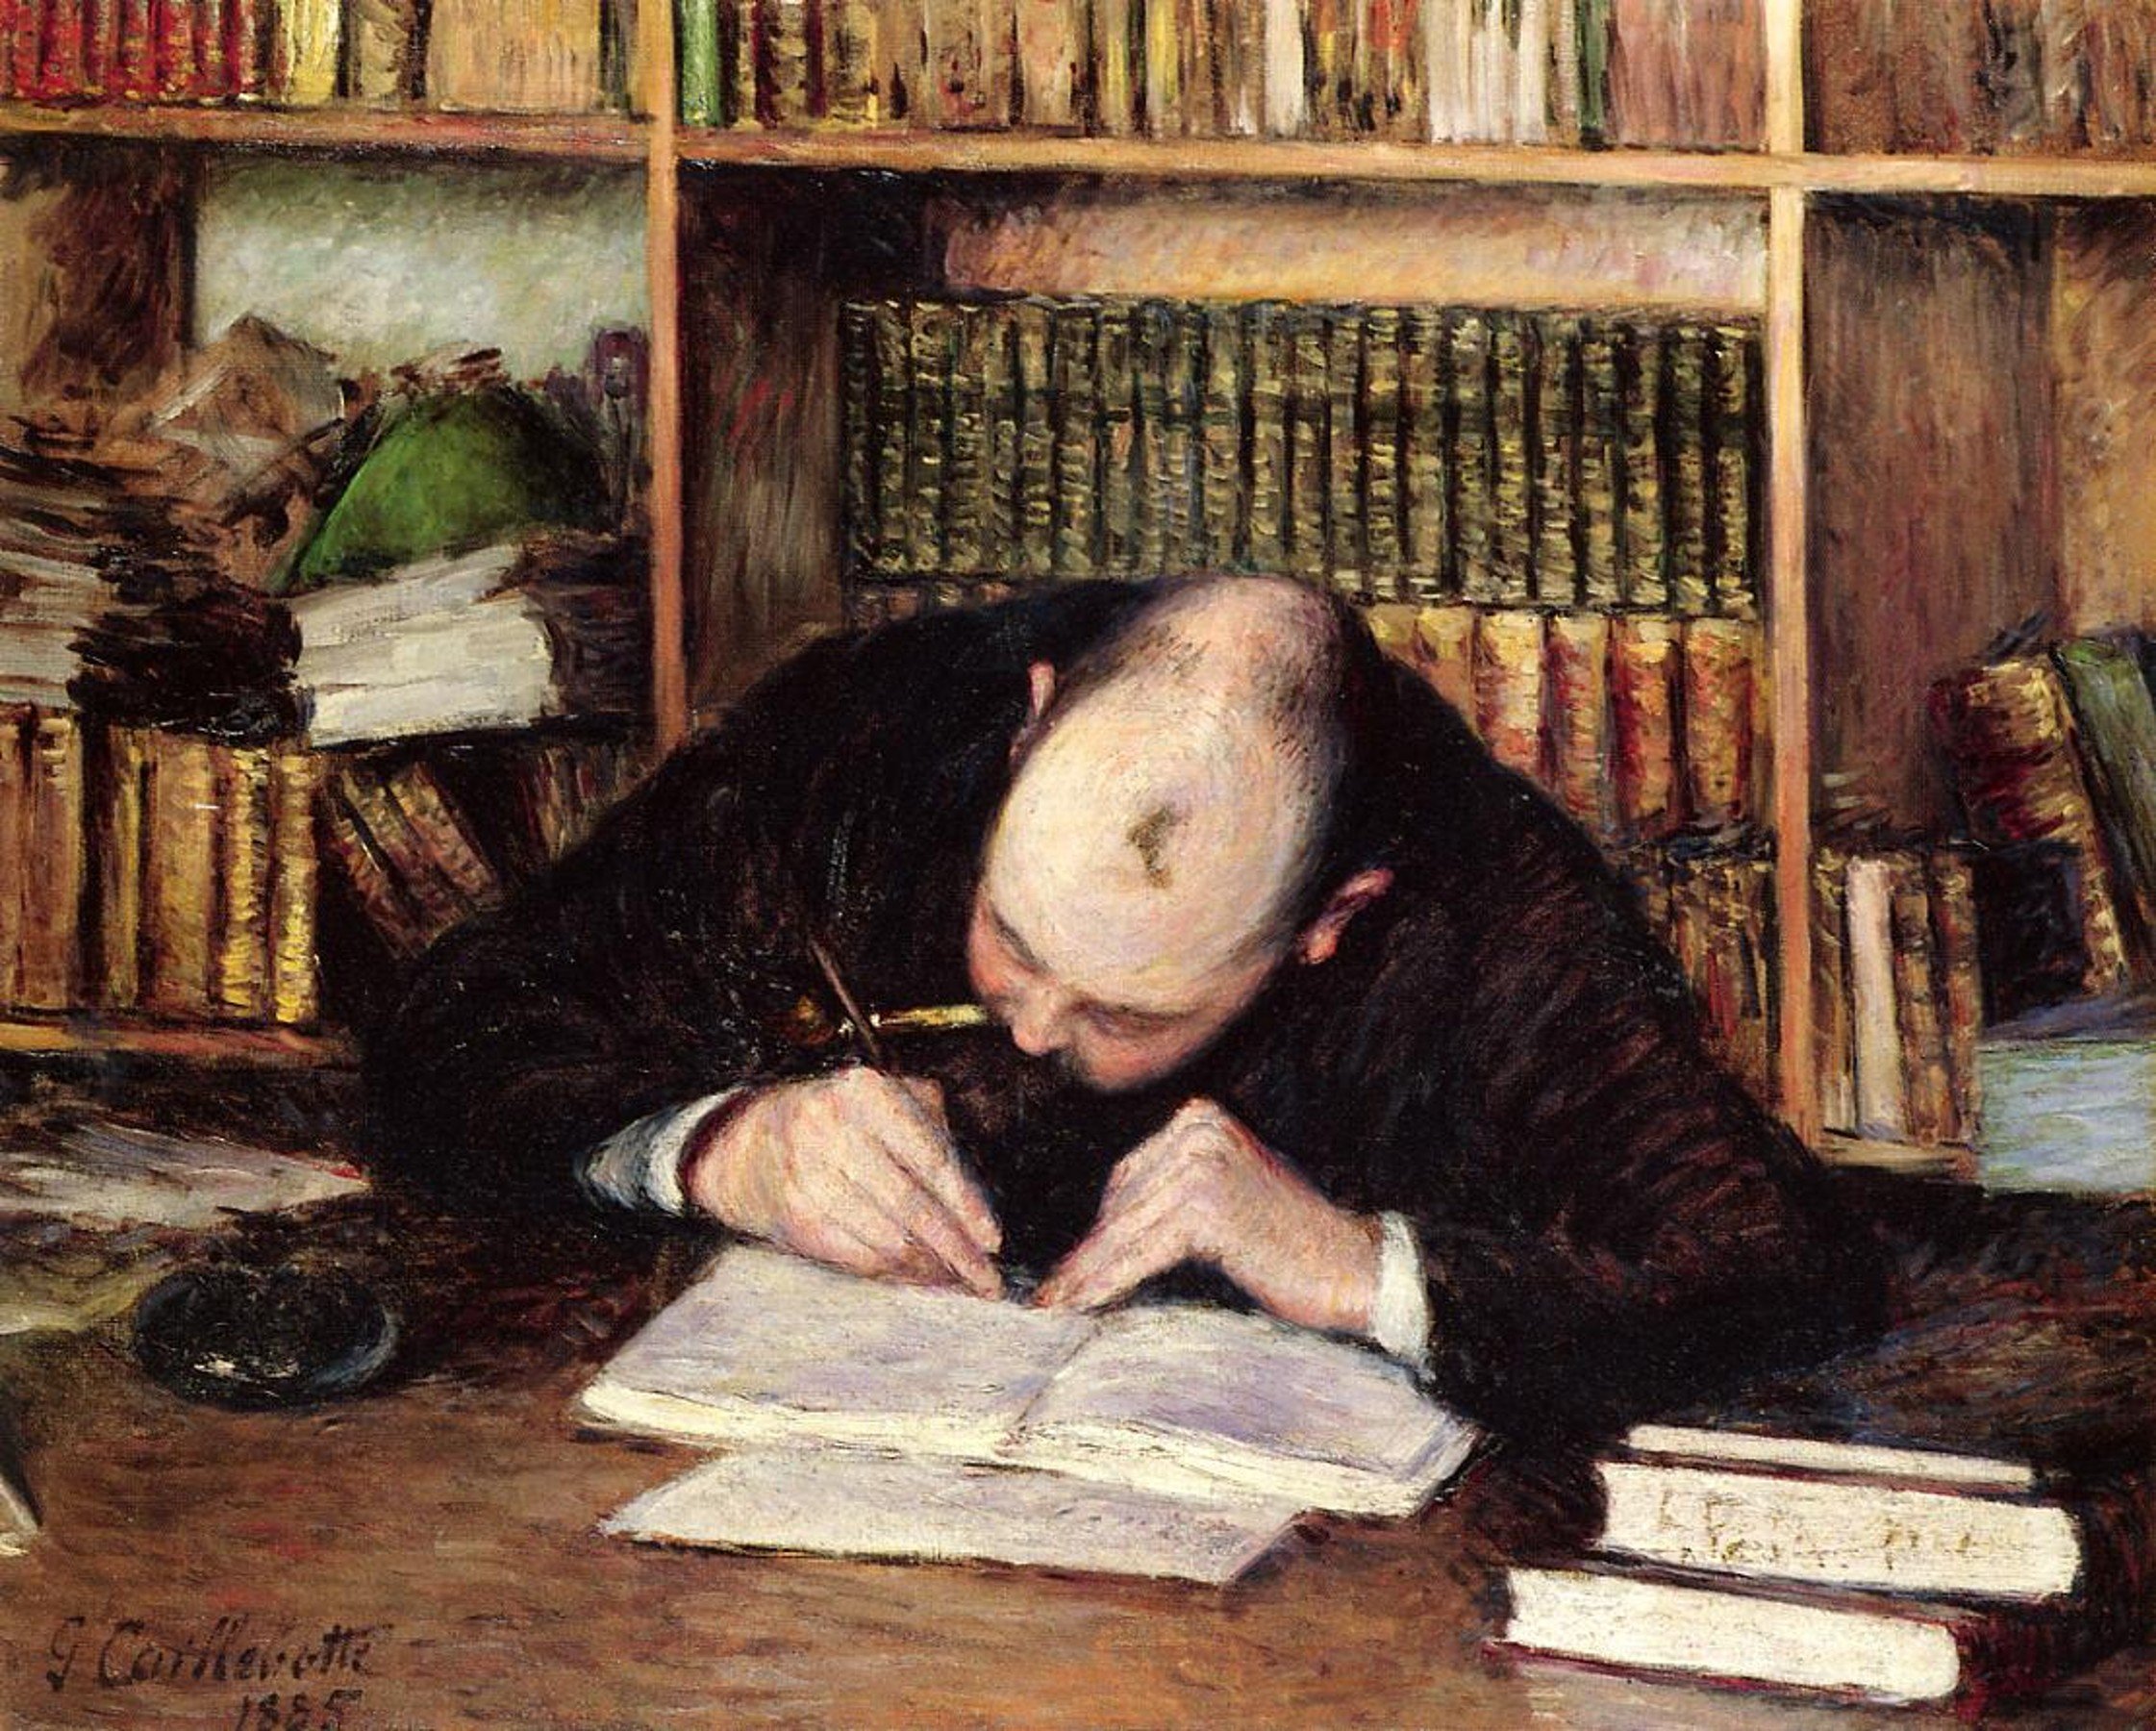 Portrait of a Man Writing in His Study (Caillebotte, 1885)